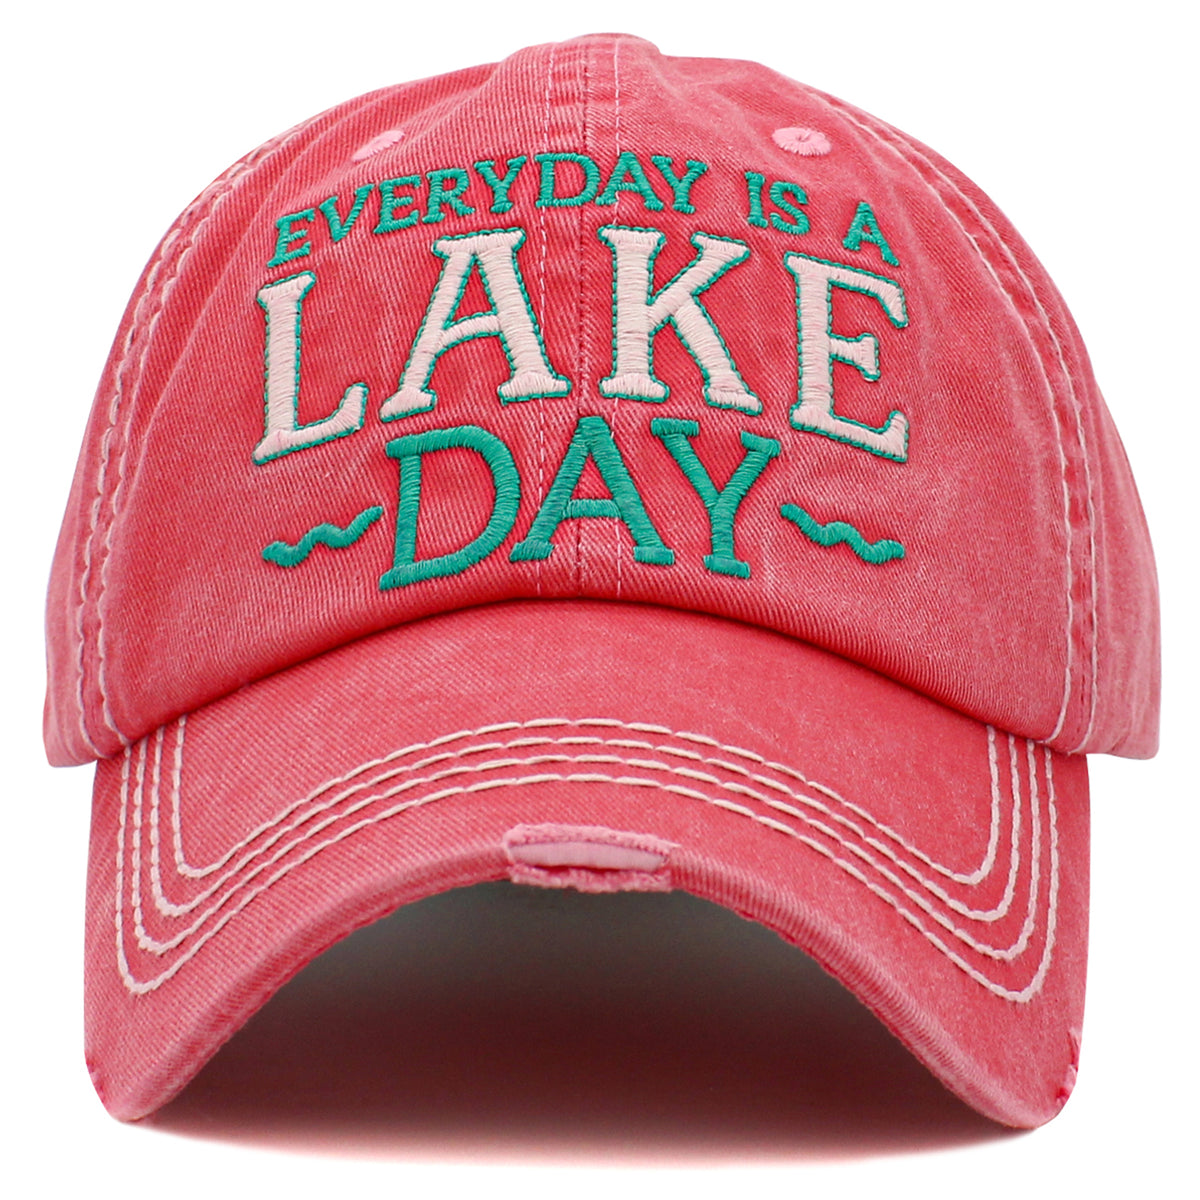 1499 - Everyday Is A Lake Day Hat - Hot Pink